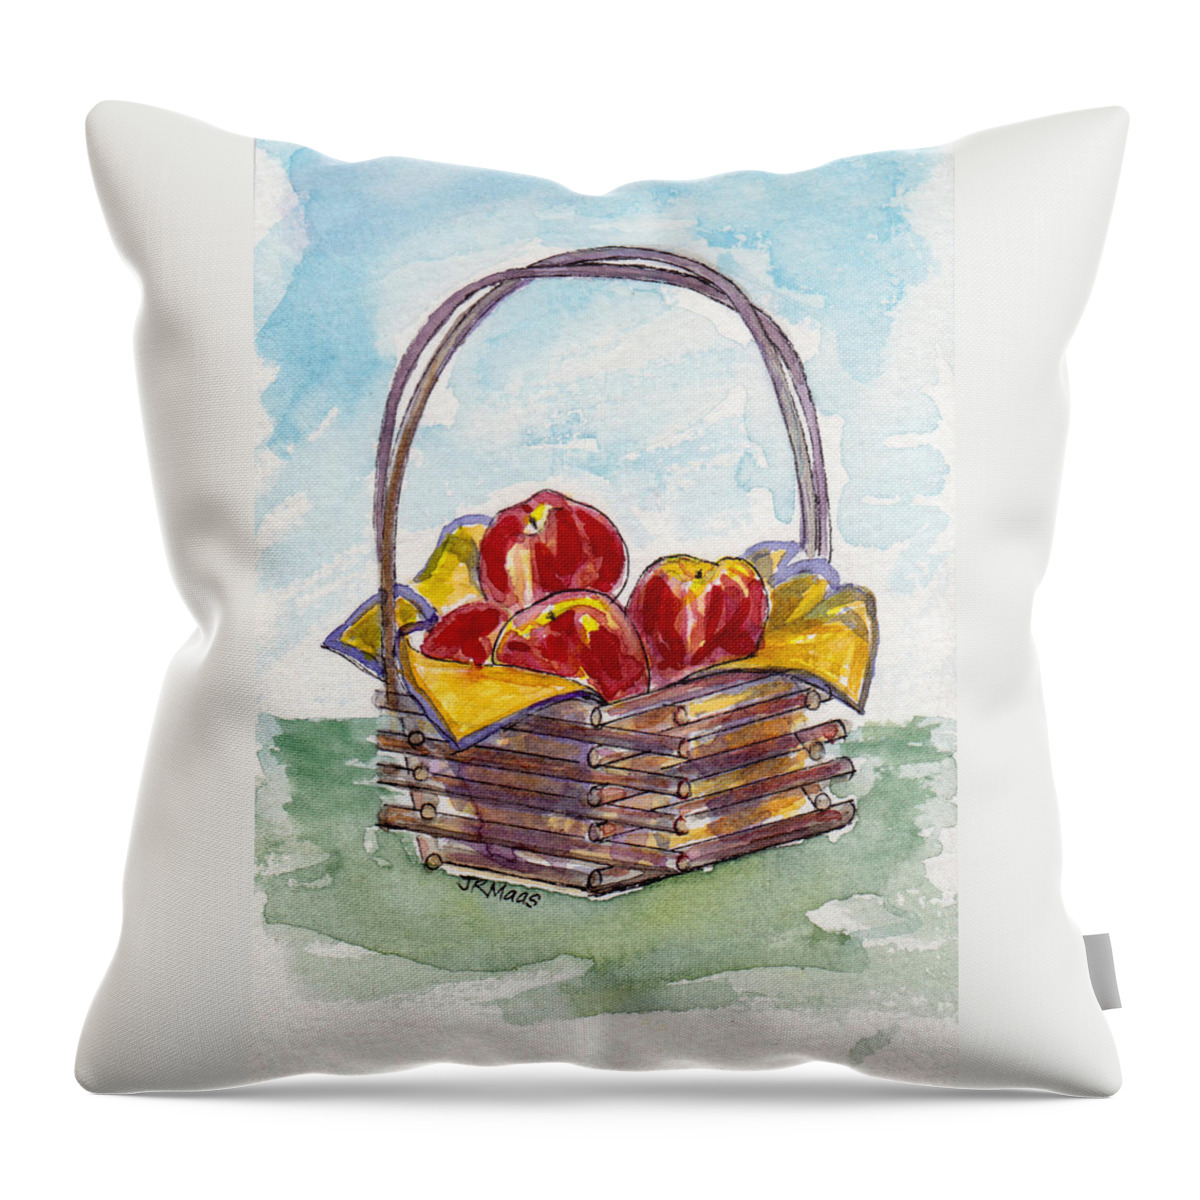 Willow Reed Basket Throw Pillow featuring the painting Apple Basket by Julie Maas